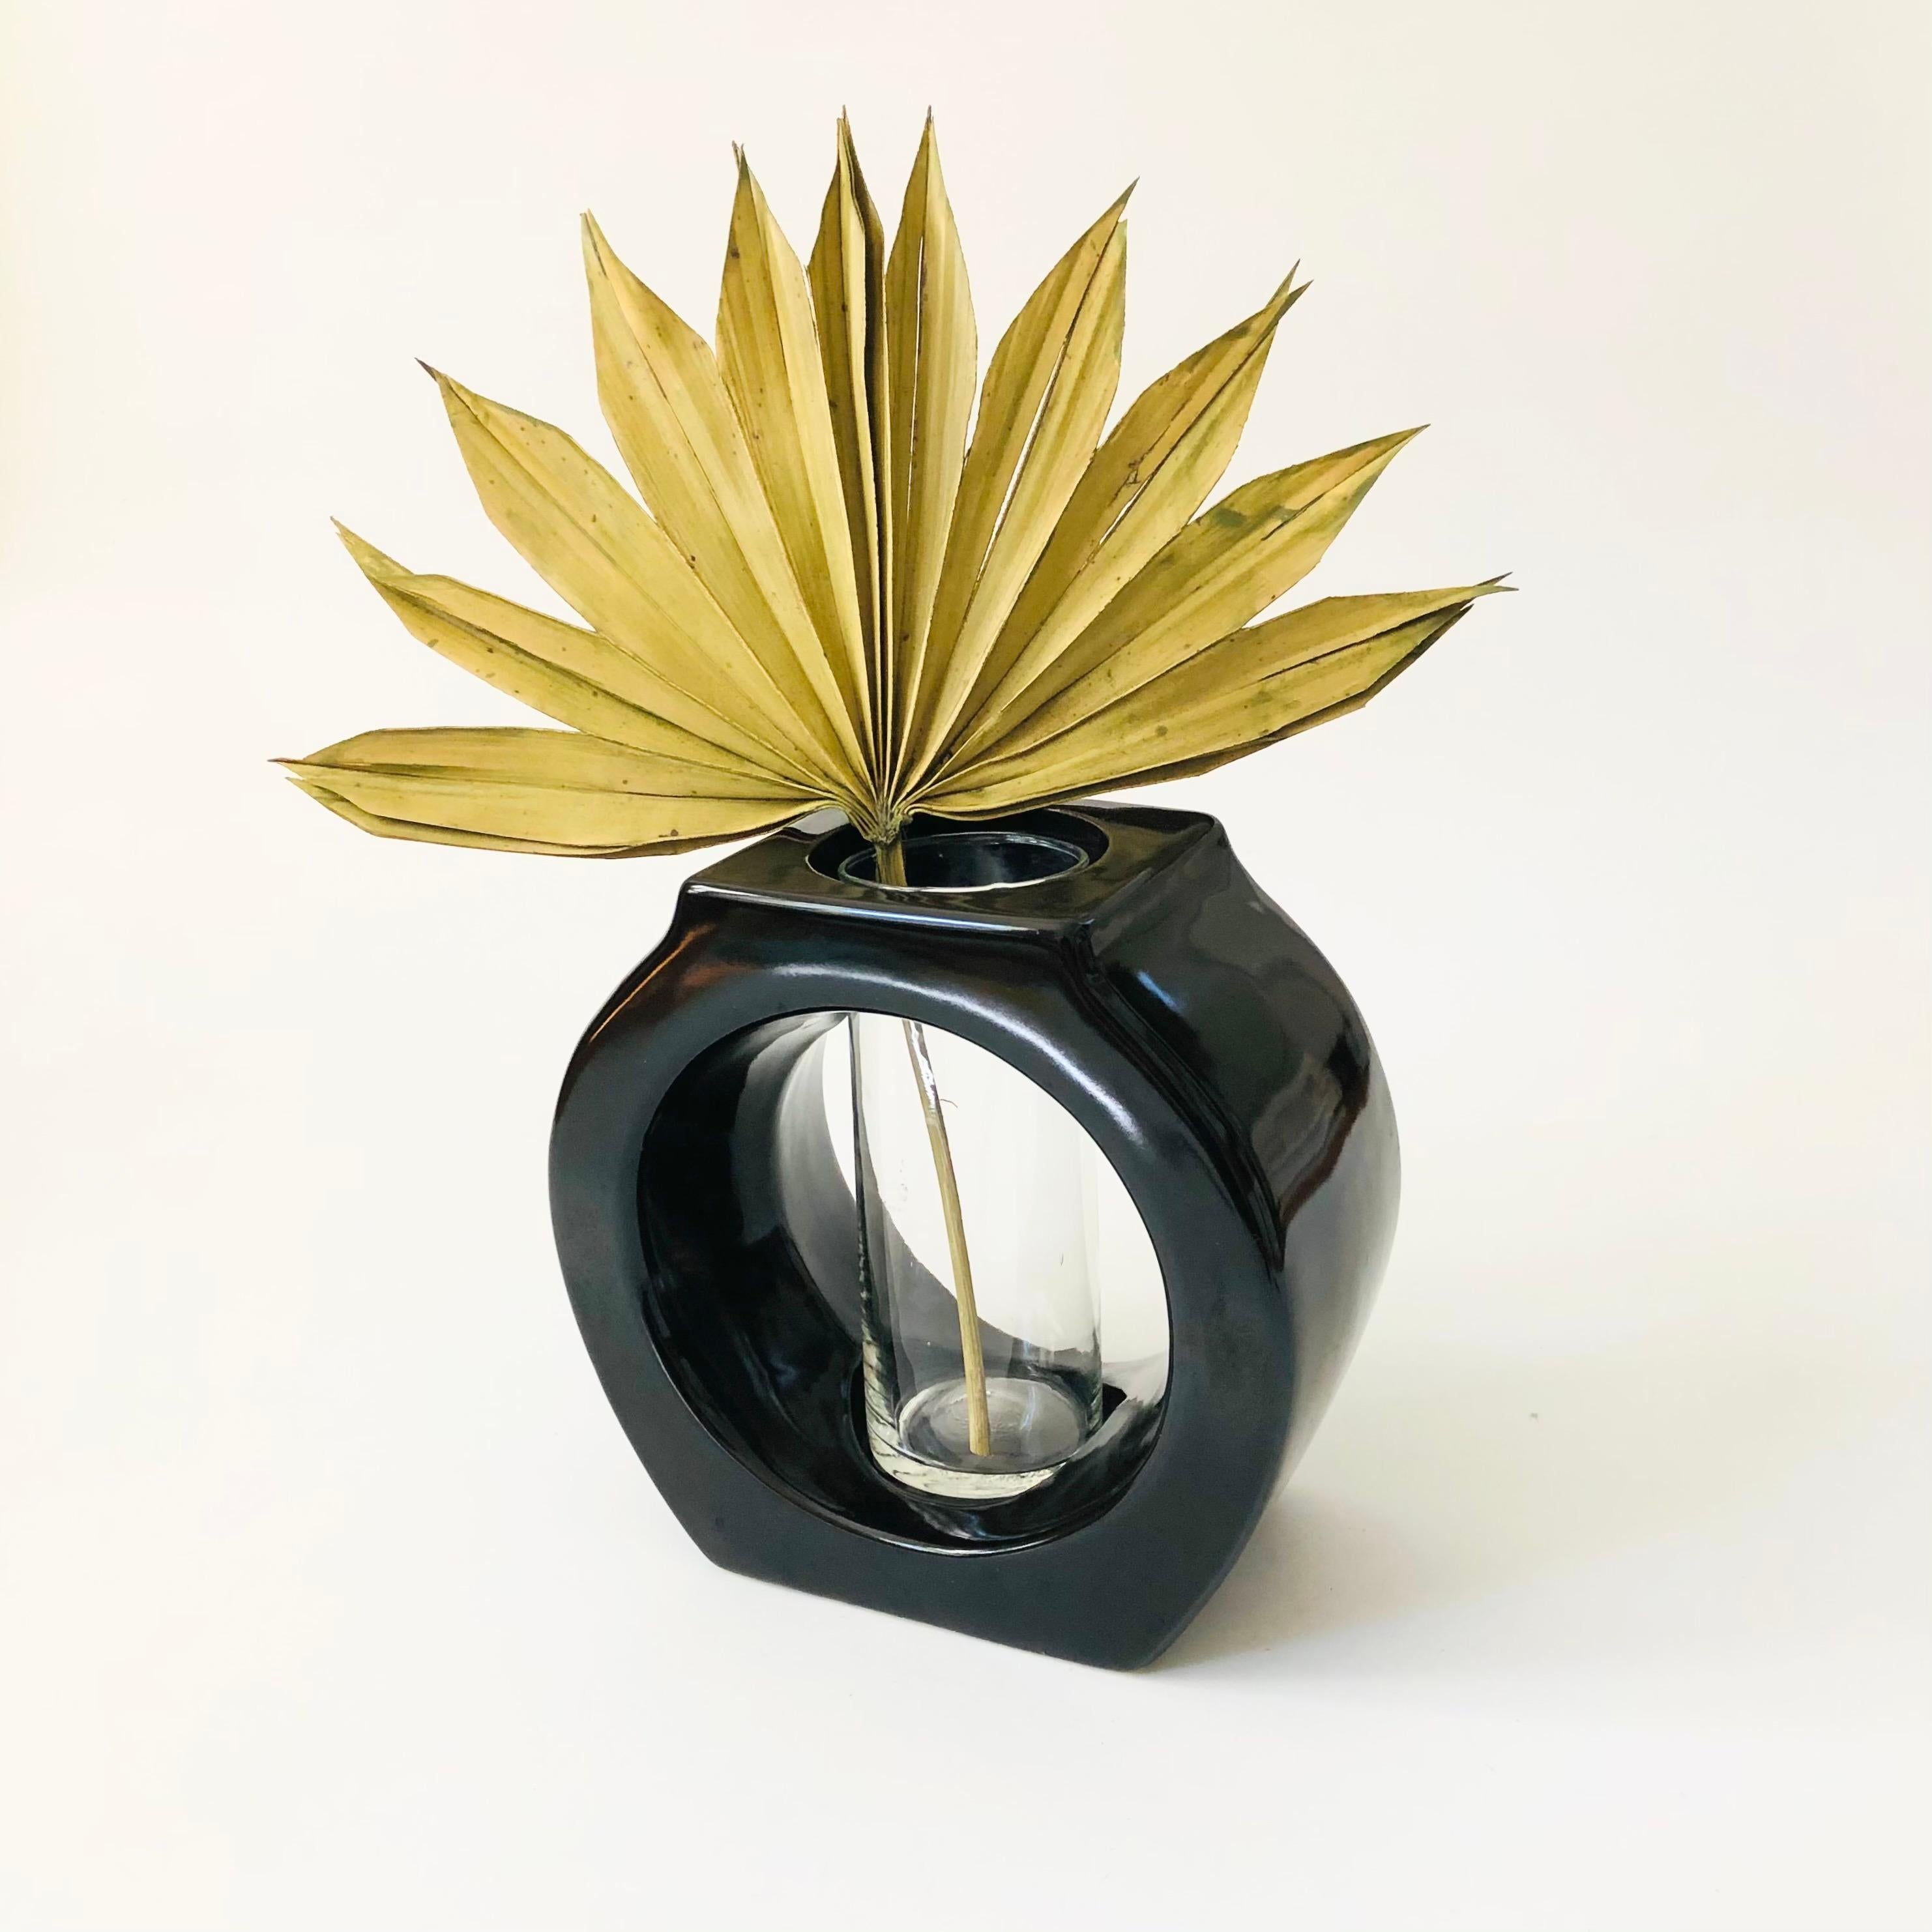 A large sculptural vintage vase. Features a glass vial in the center of a glossy black ceramic holder. Perfect for displaying floral arrangements or using as a propagation vase.

